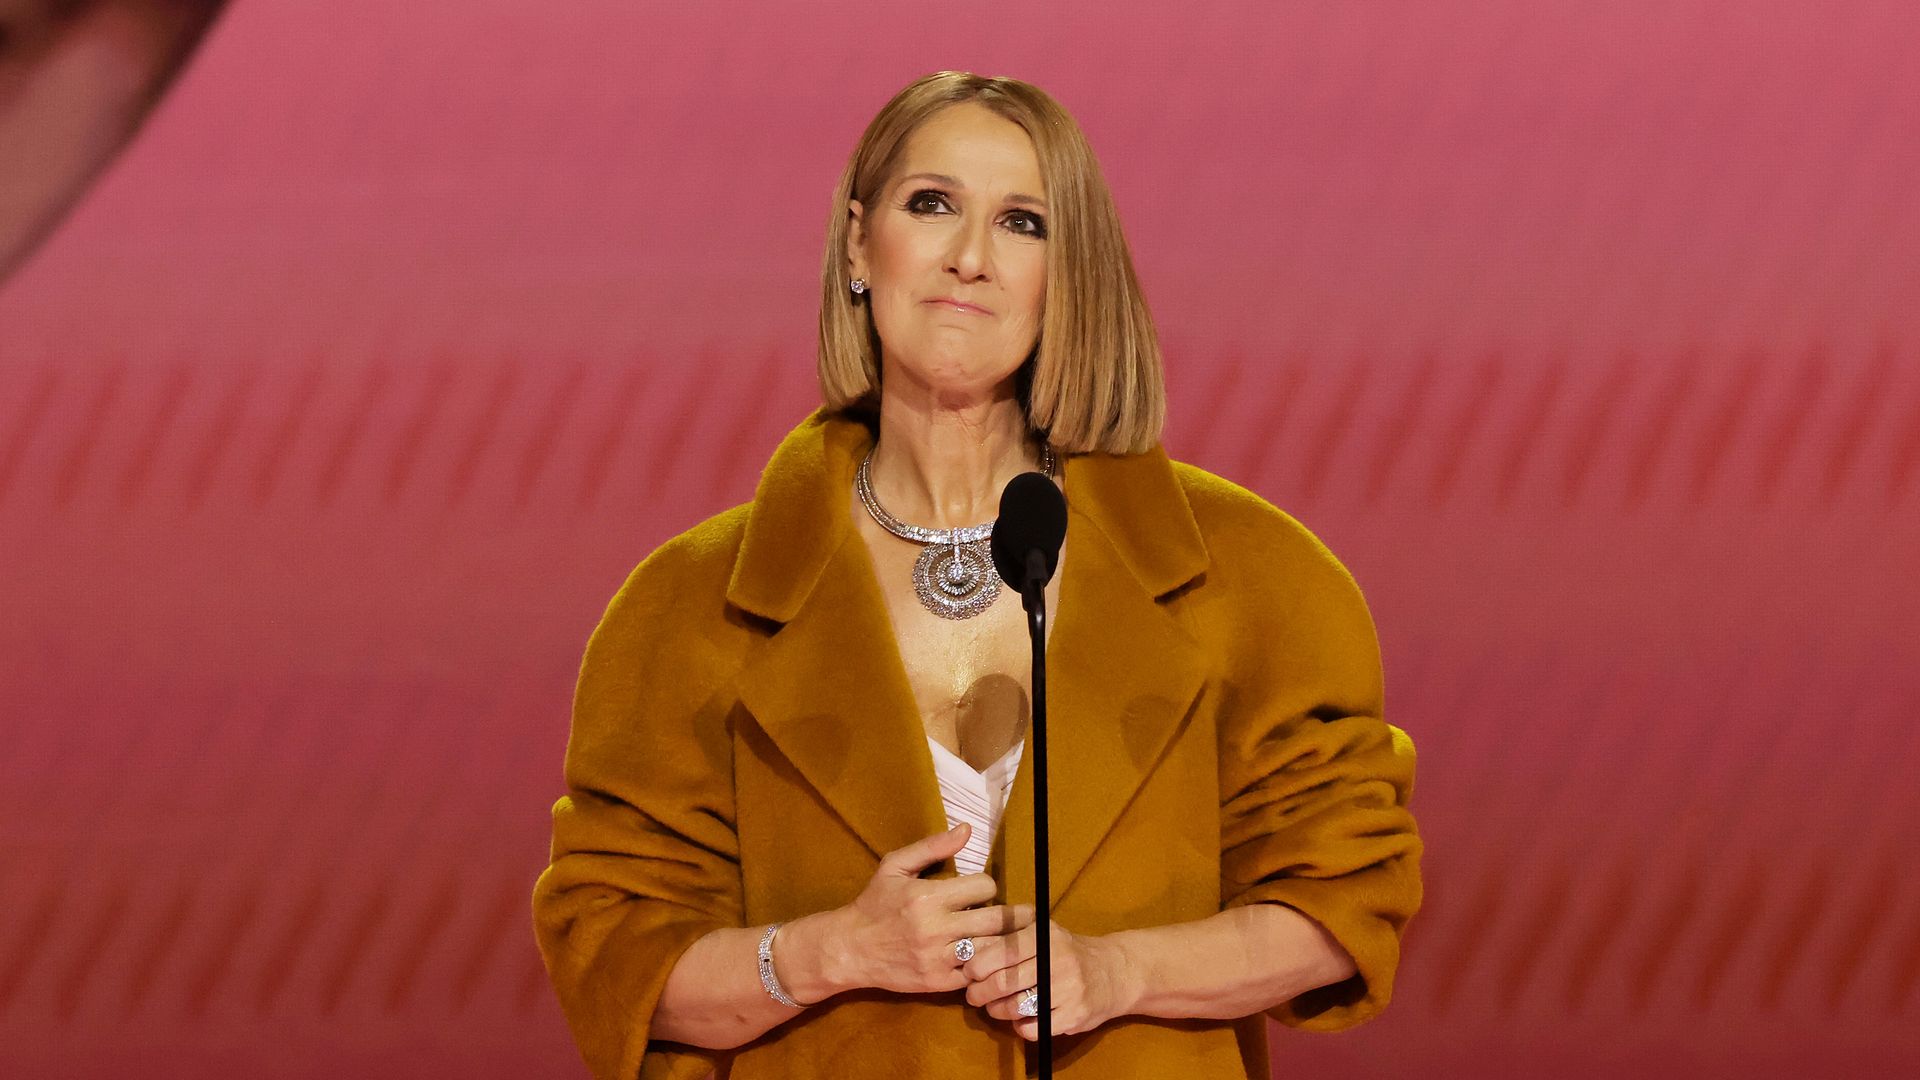 Celine received a standing ovation